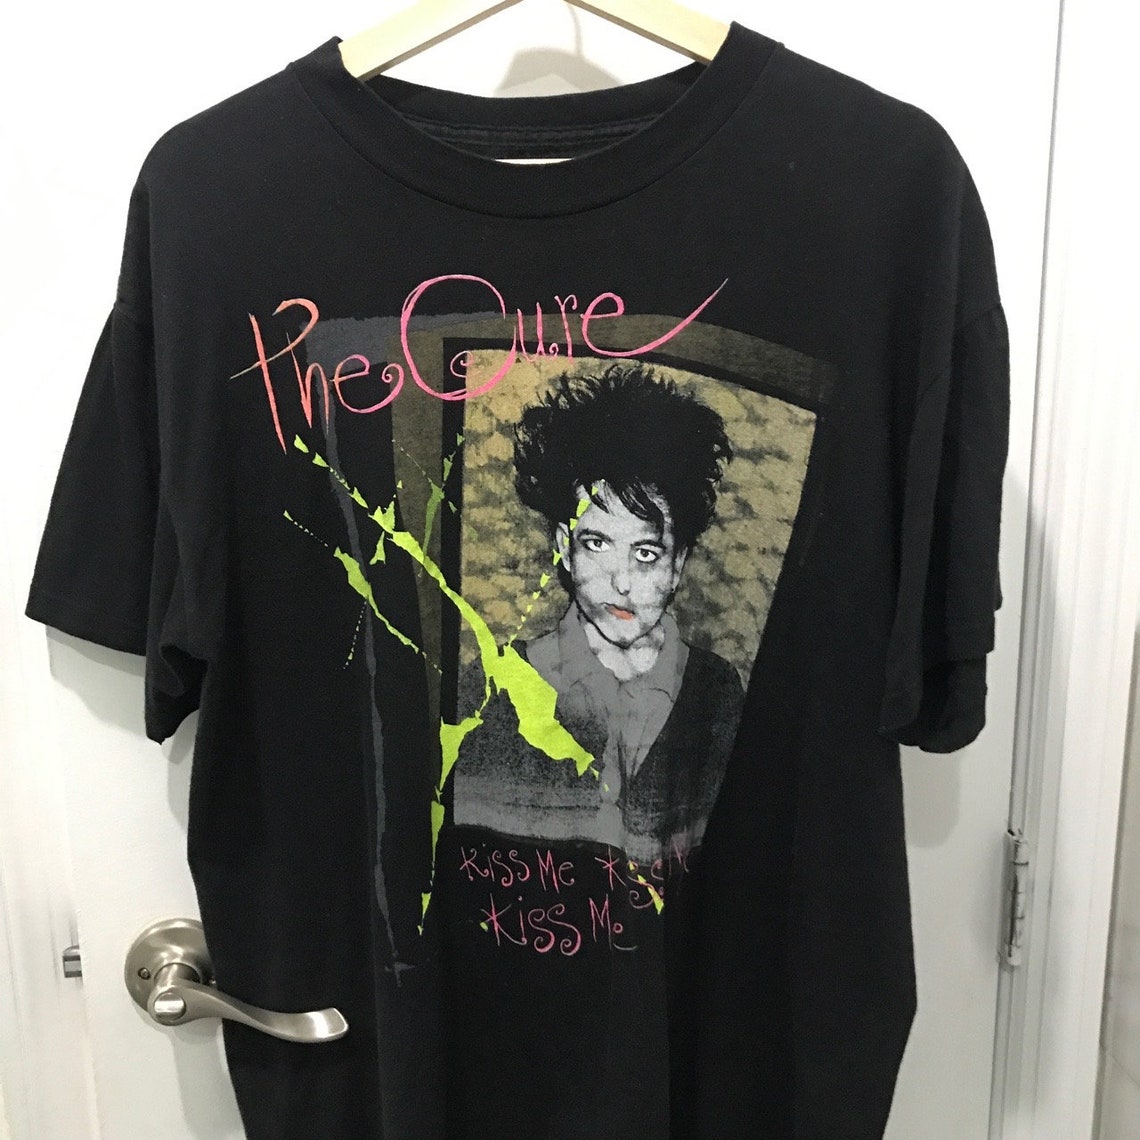 The Cure T-shirt kissing tour 1987 | Etsy